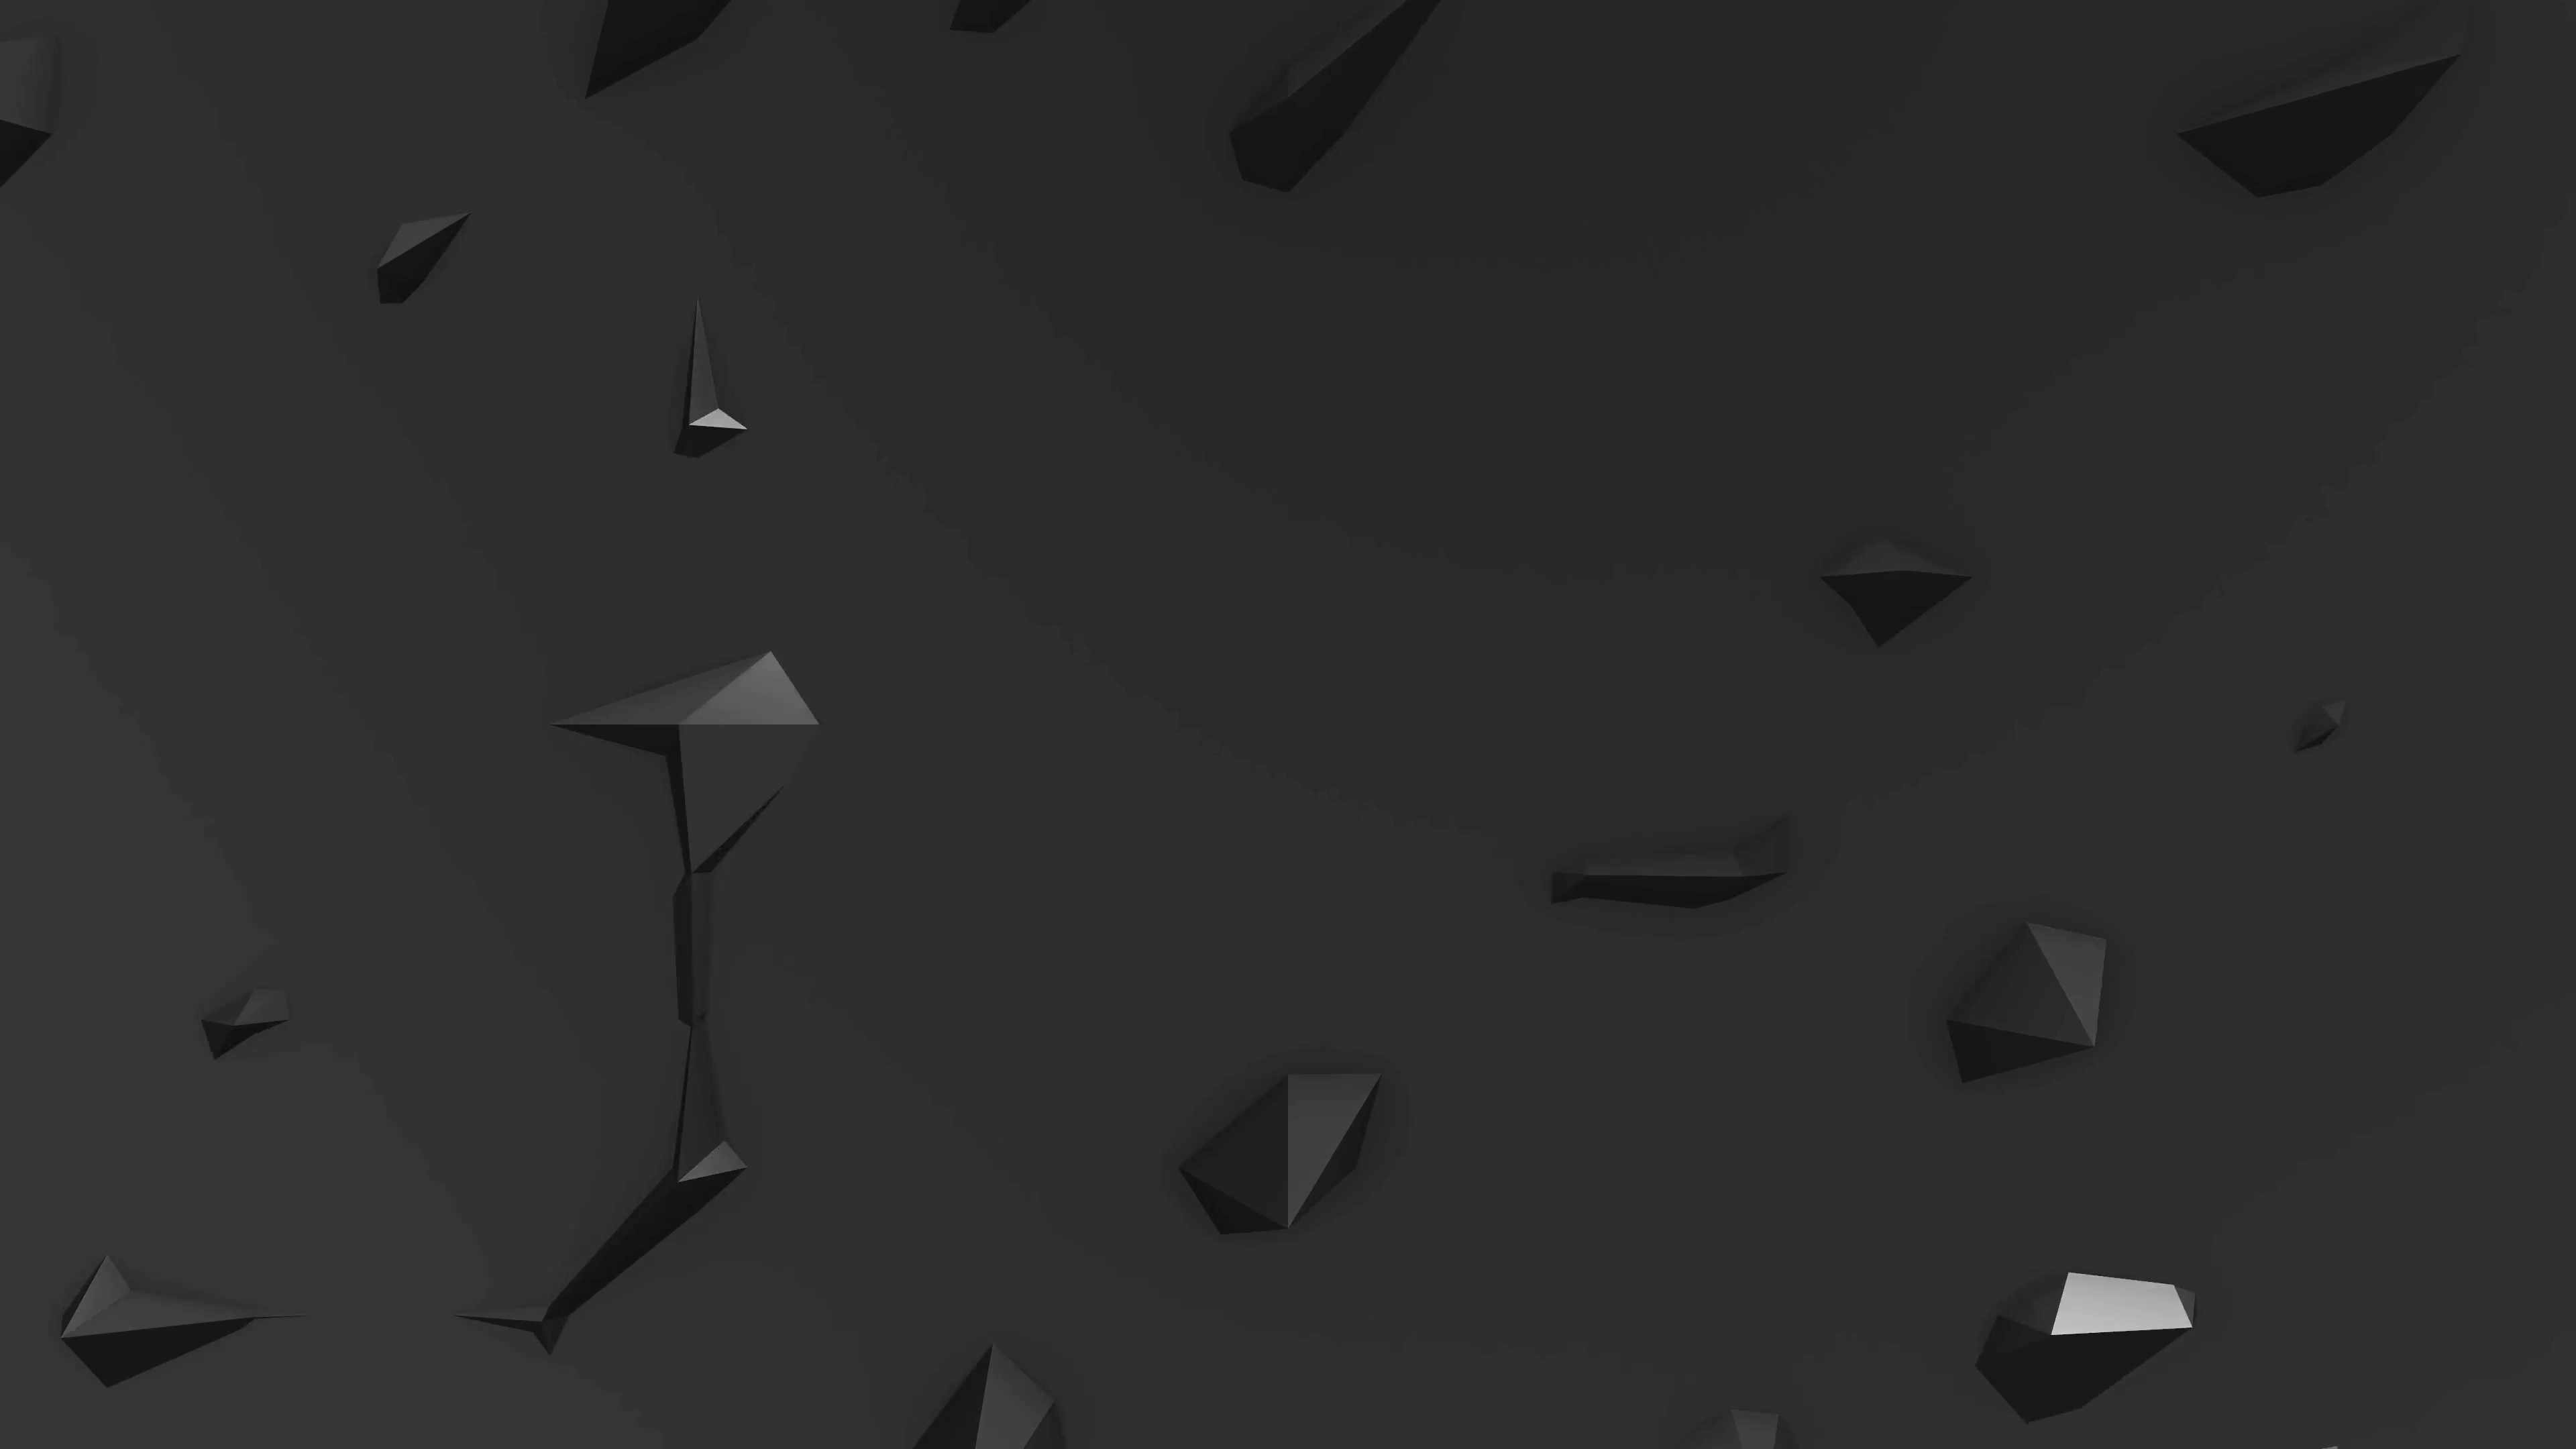 4k Black Low Poly Abstract Background. Black spikes appear